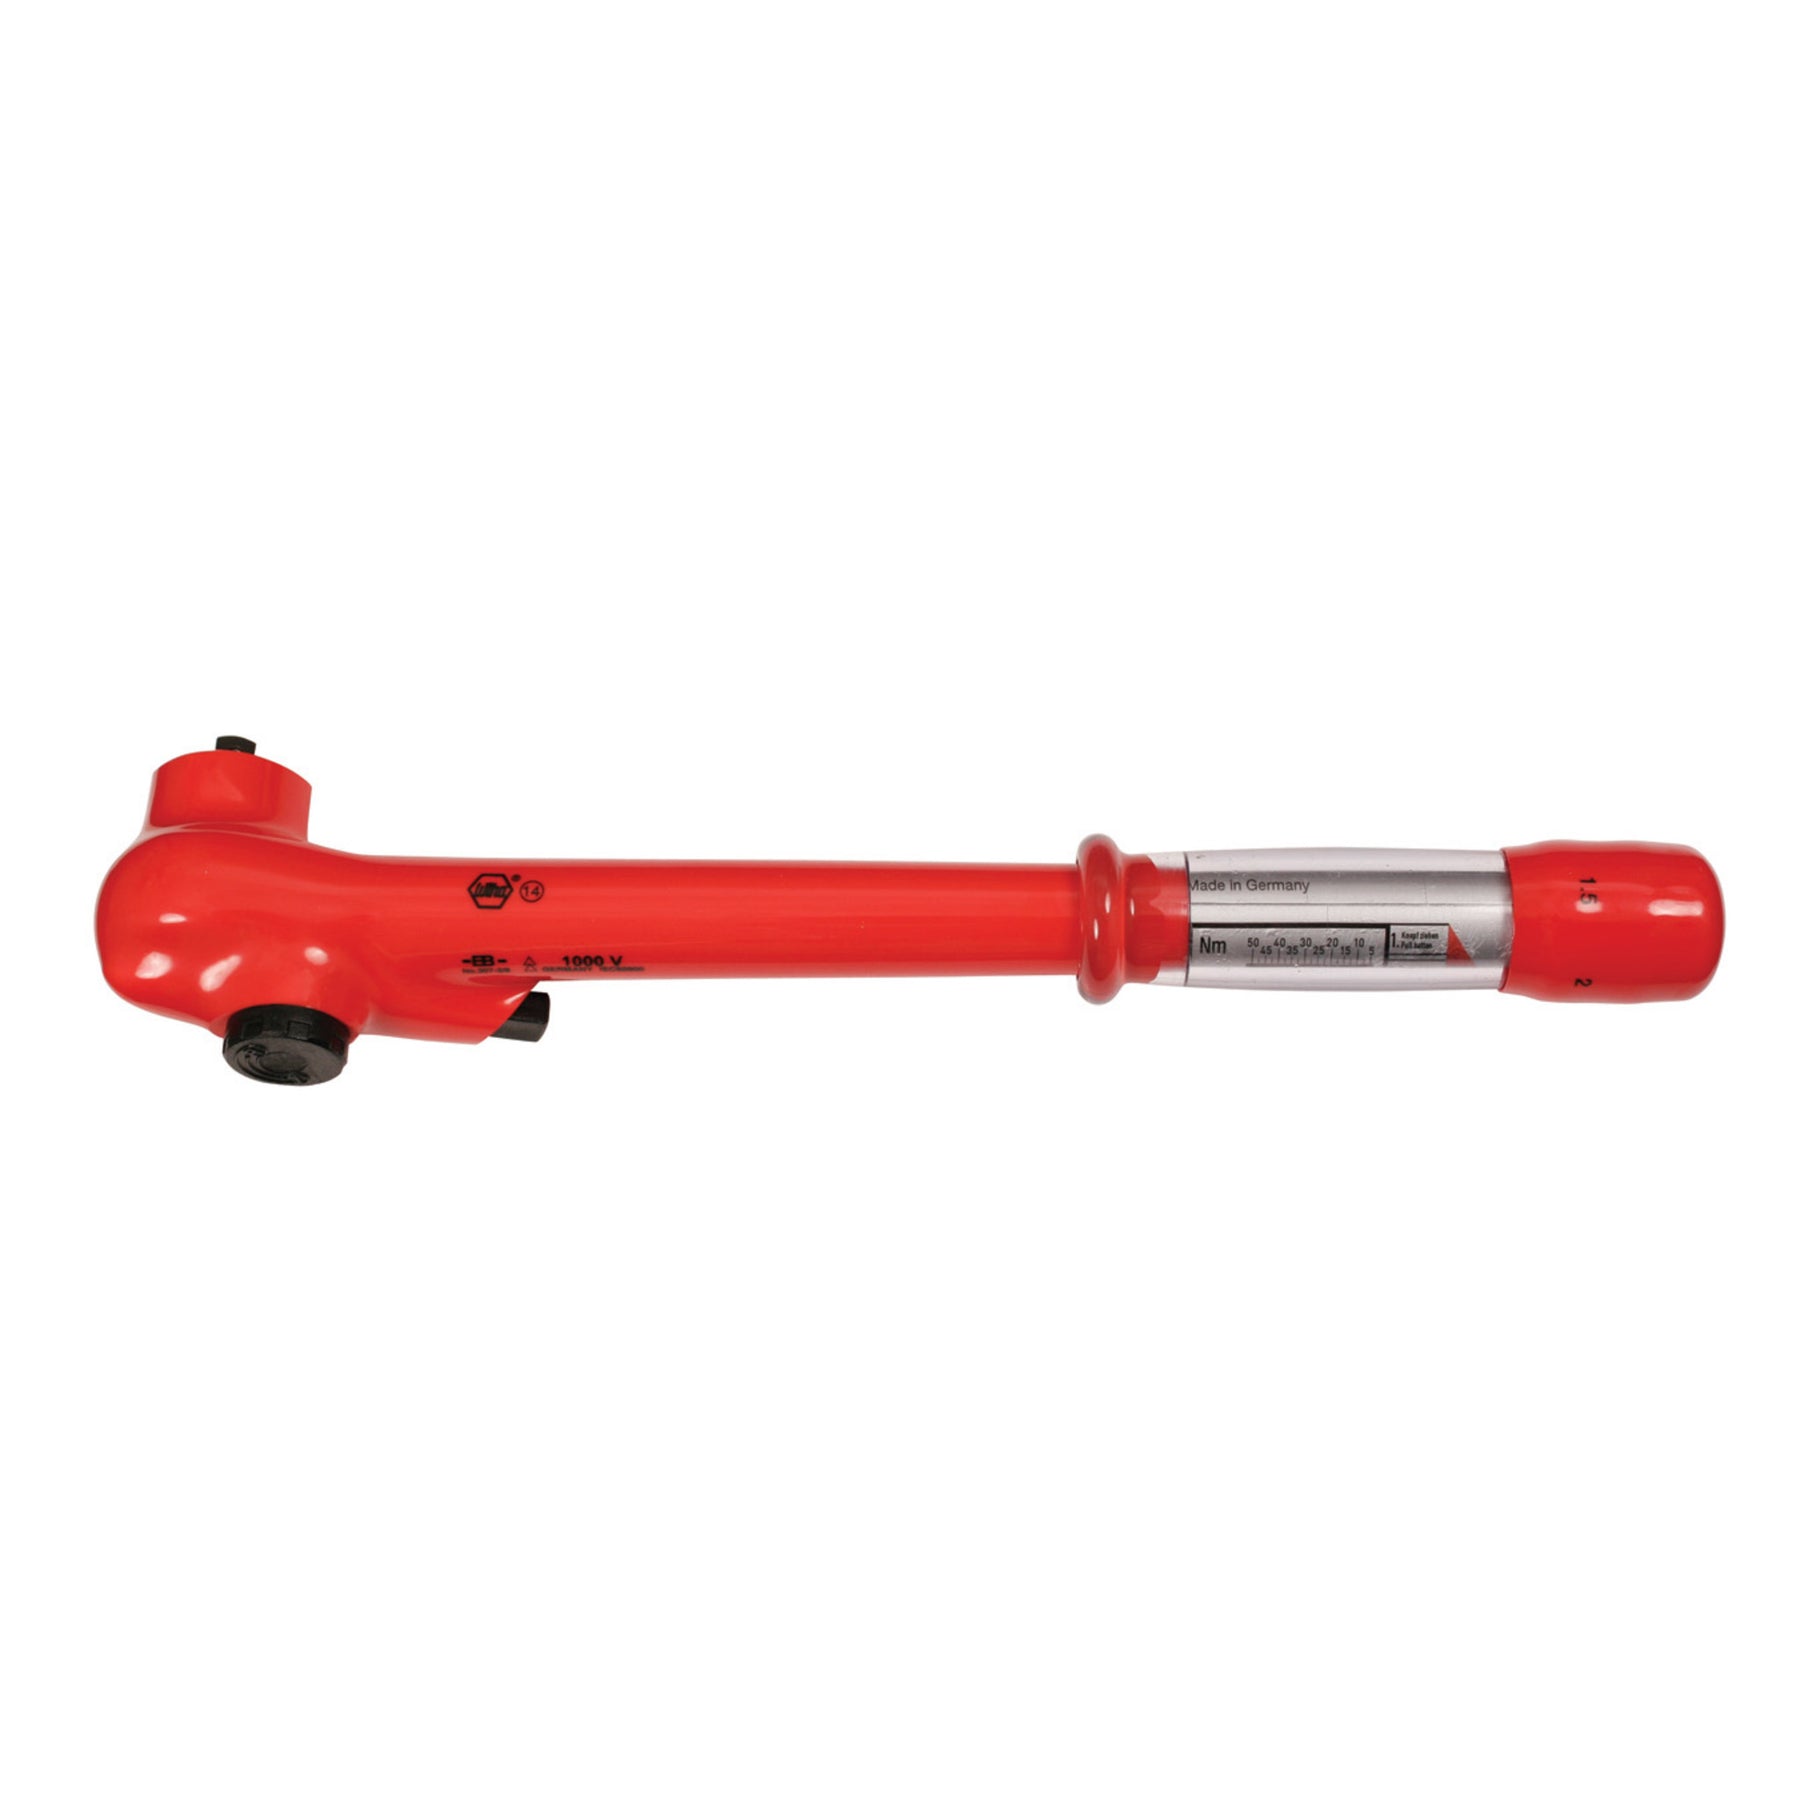 Insulated Torque Wrenches